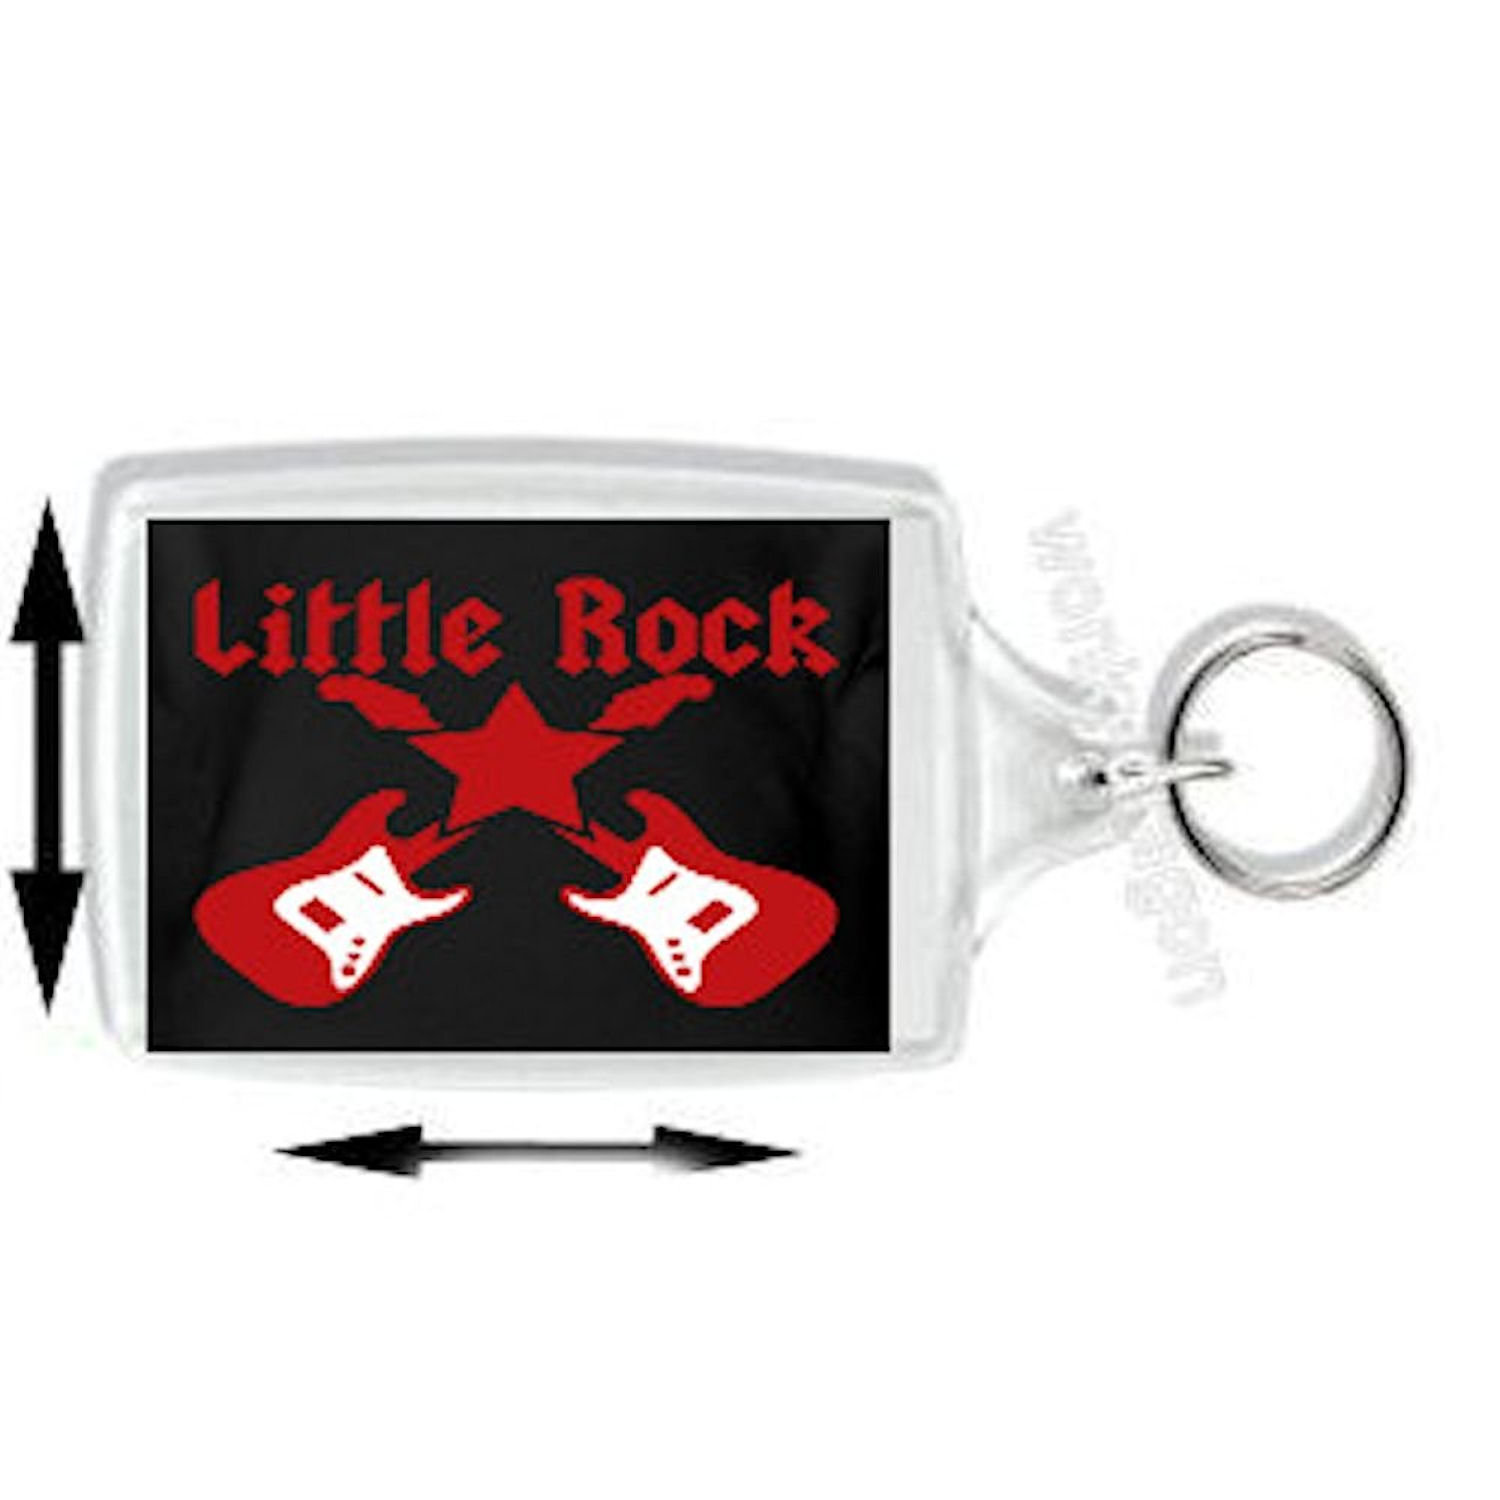 keyring double sided ,little rock crossed guitars new keychain key ring